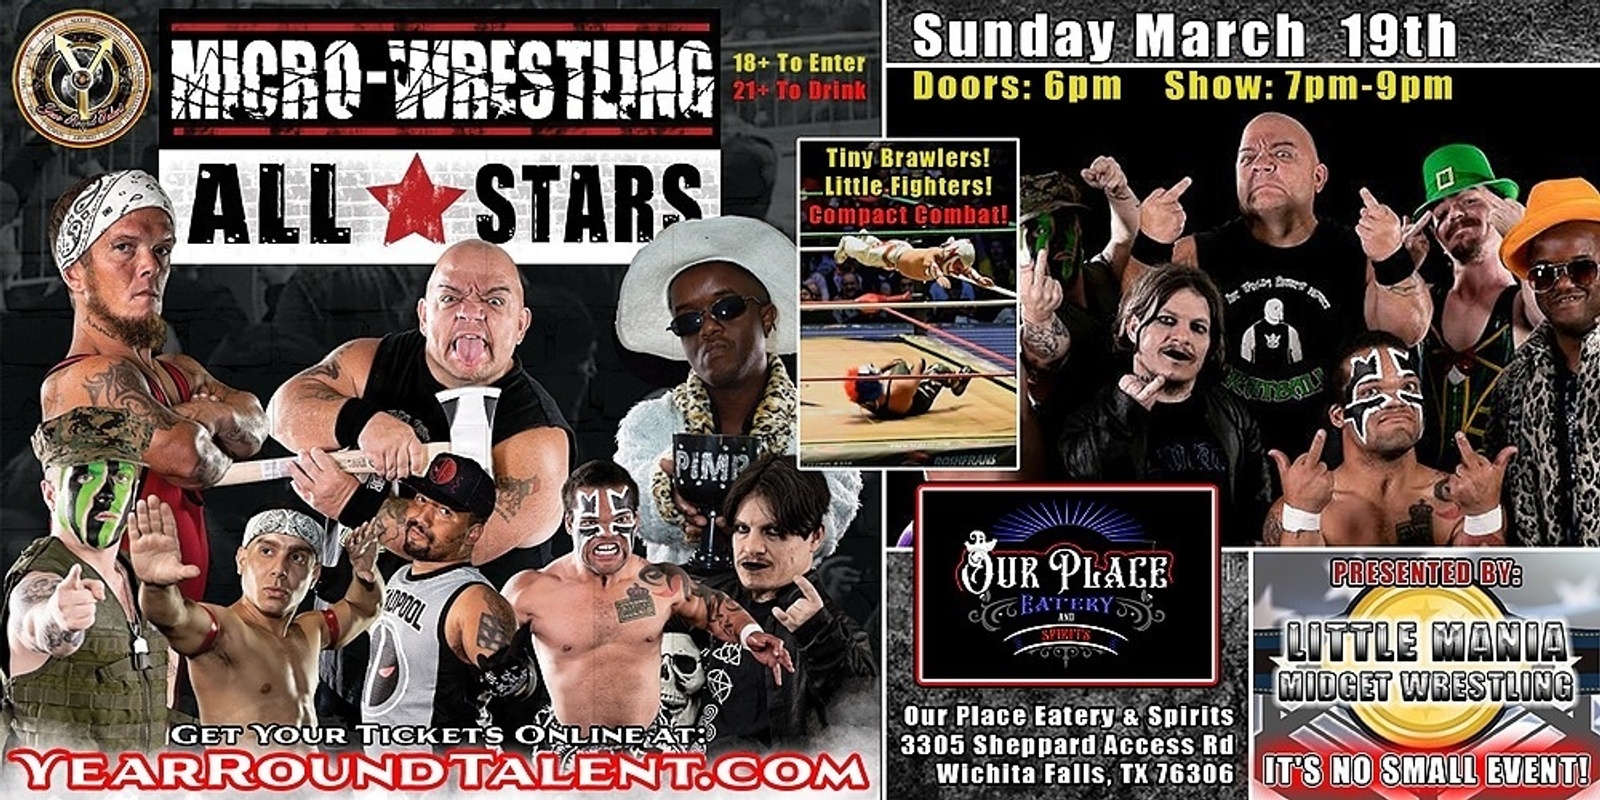 Banner image for Wichita Falls, TX - Micro-Wresting All * Stars: Little Mania Rips Through the Ring!